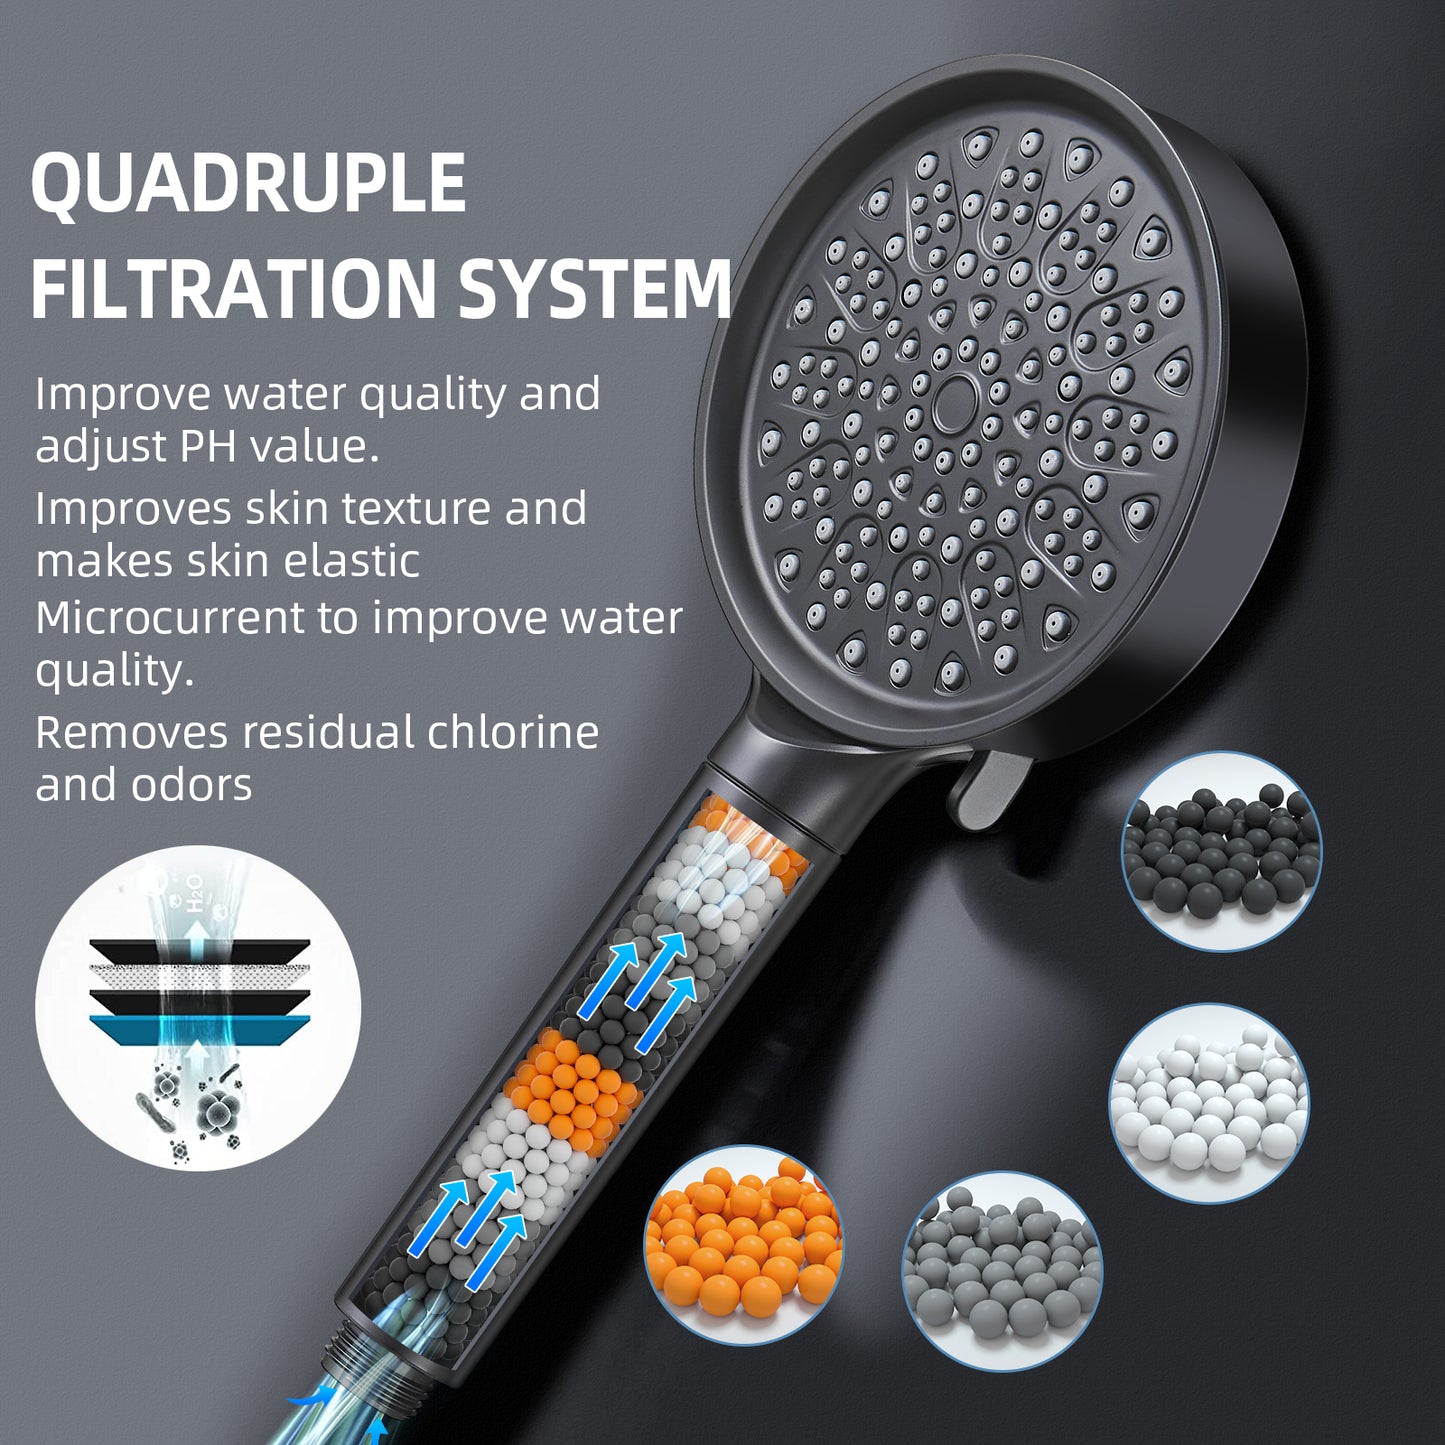 Cobbe Handheld Shower Head with Filter, High Pressure 6 Spray Mode Showerhead with 60" Hose, Bracket and Water Softener Filters Beads for Hard Water Remove Chlorine and Harmful Substance